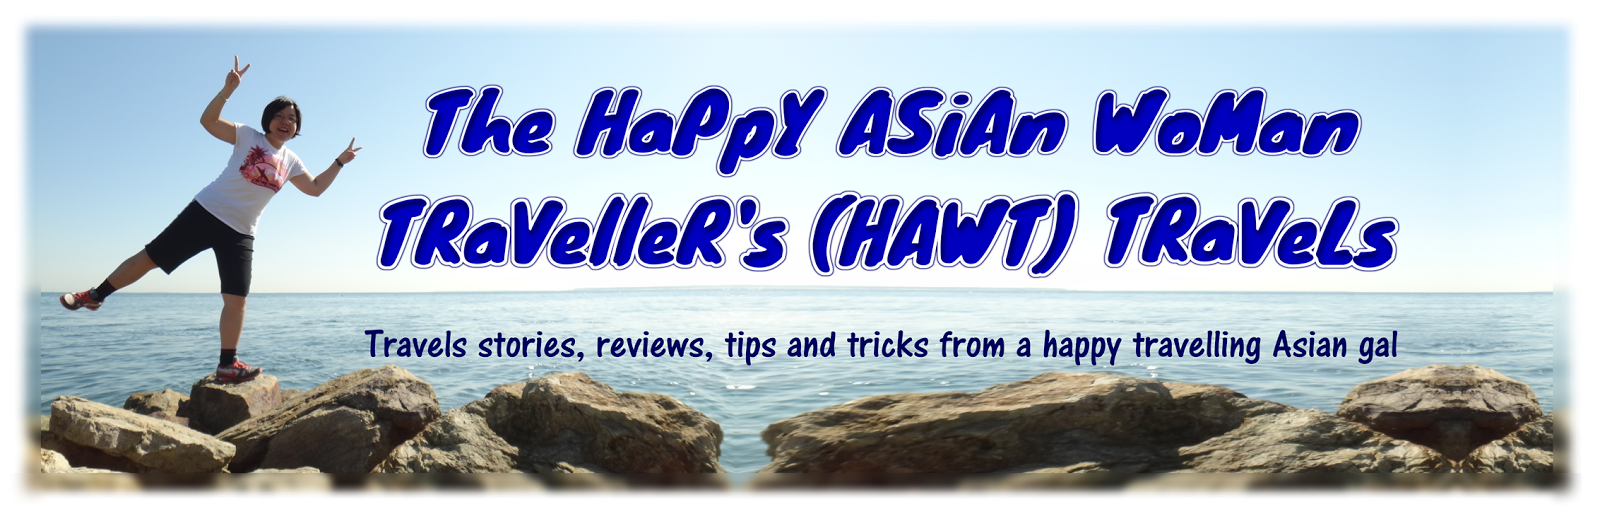 The Happy Asian Woman Traveller's (HAWT) Travels